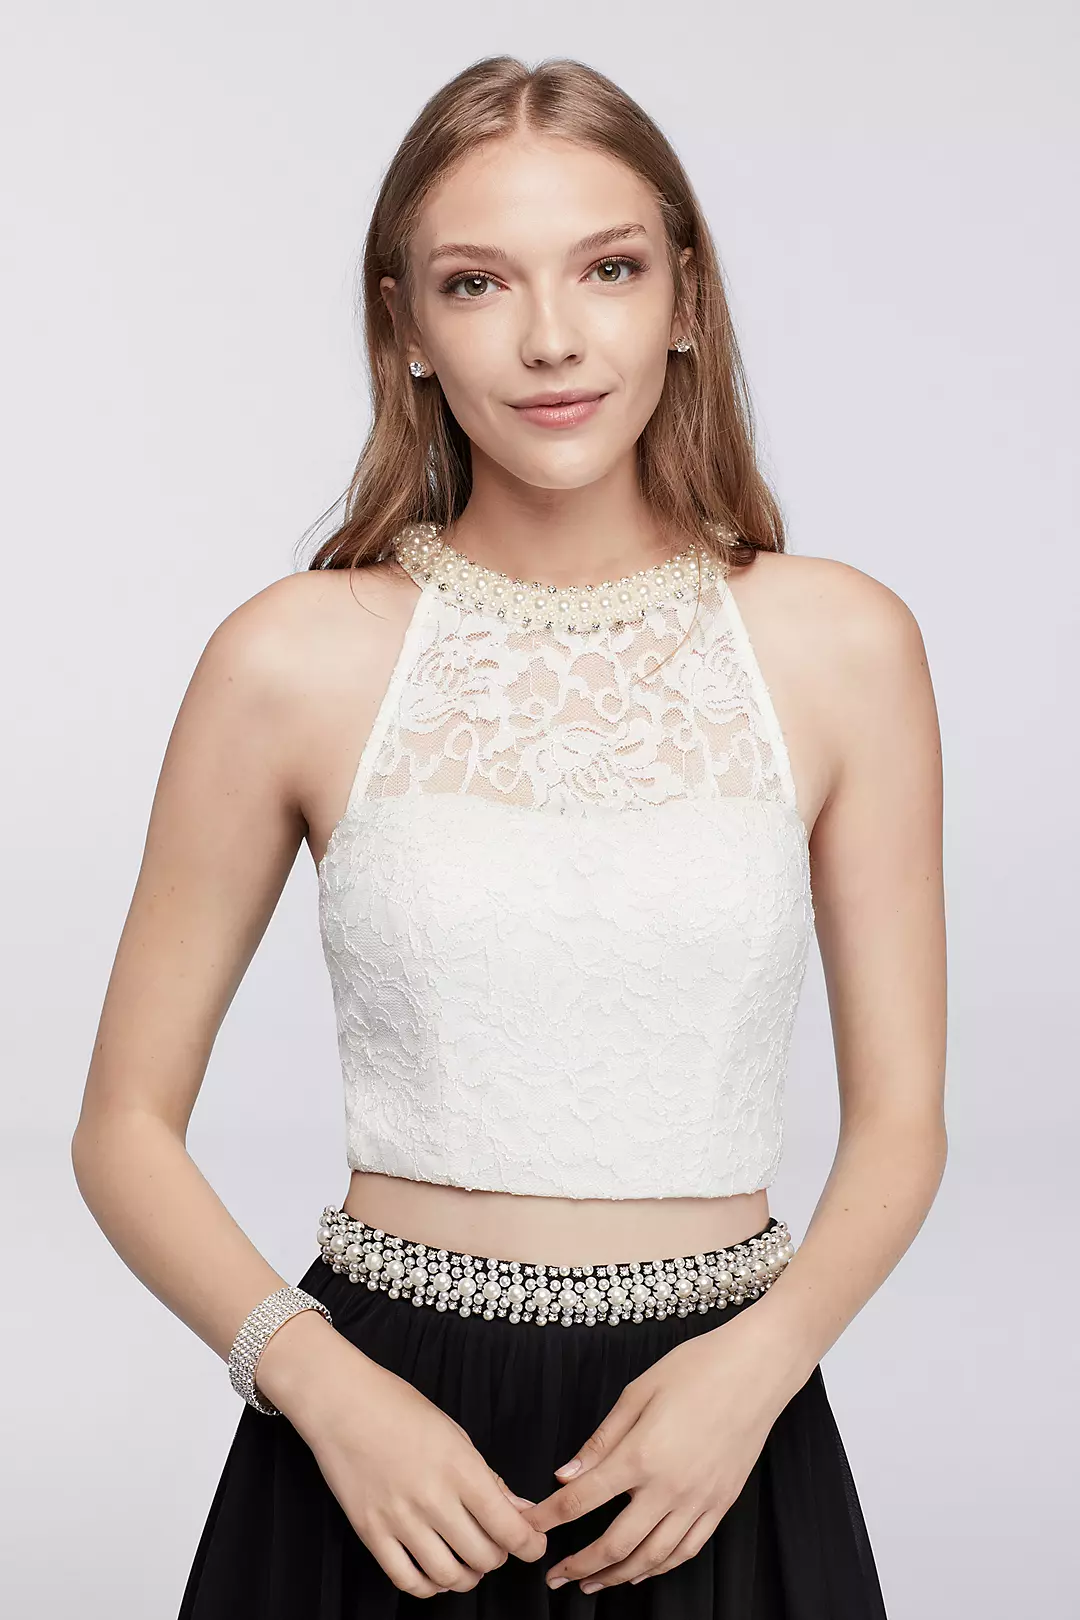 Pearl-Embellished Lace Crop Top and Chiffon Skirt Image 3